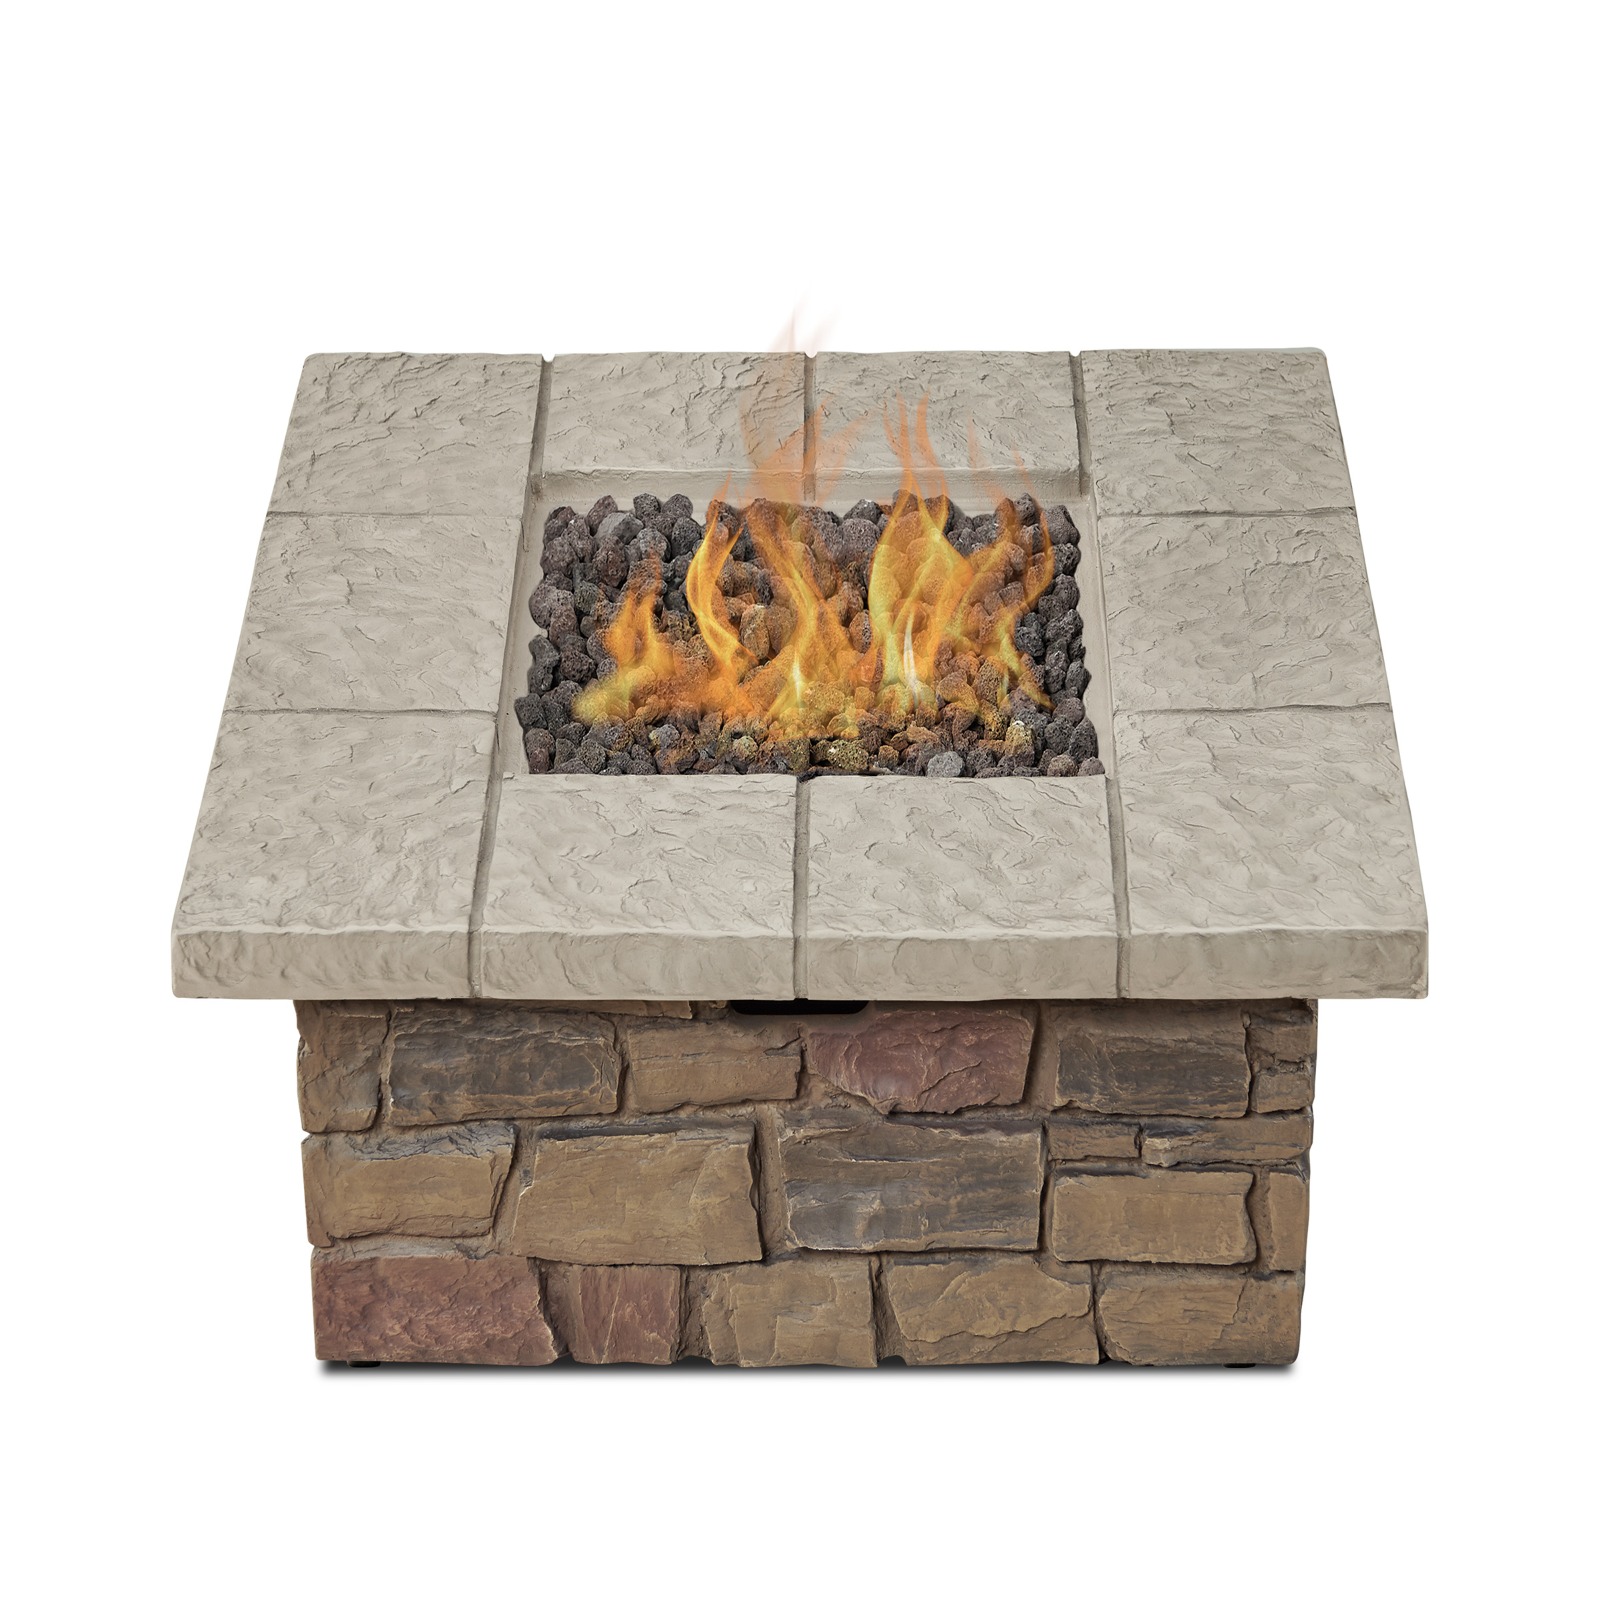 Sedona Square Propane Fire Table with NG Conversion Kit in buff top view